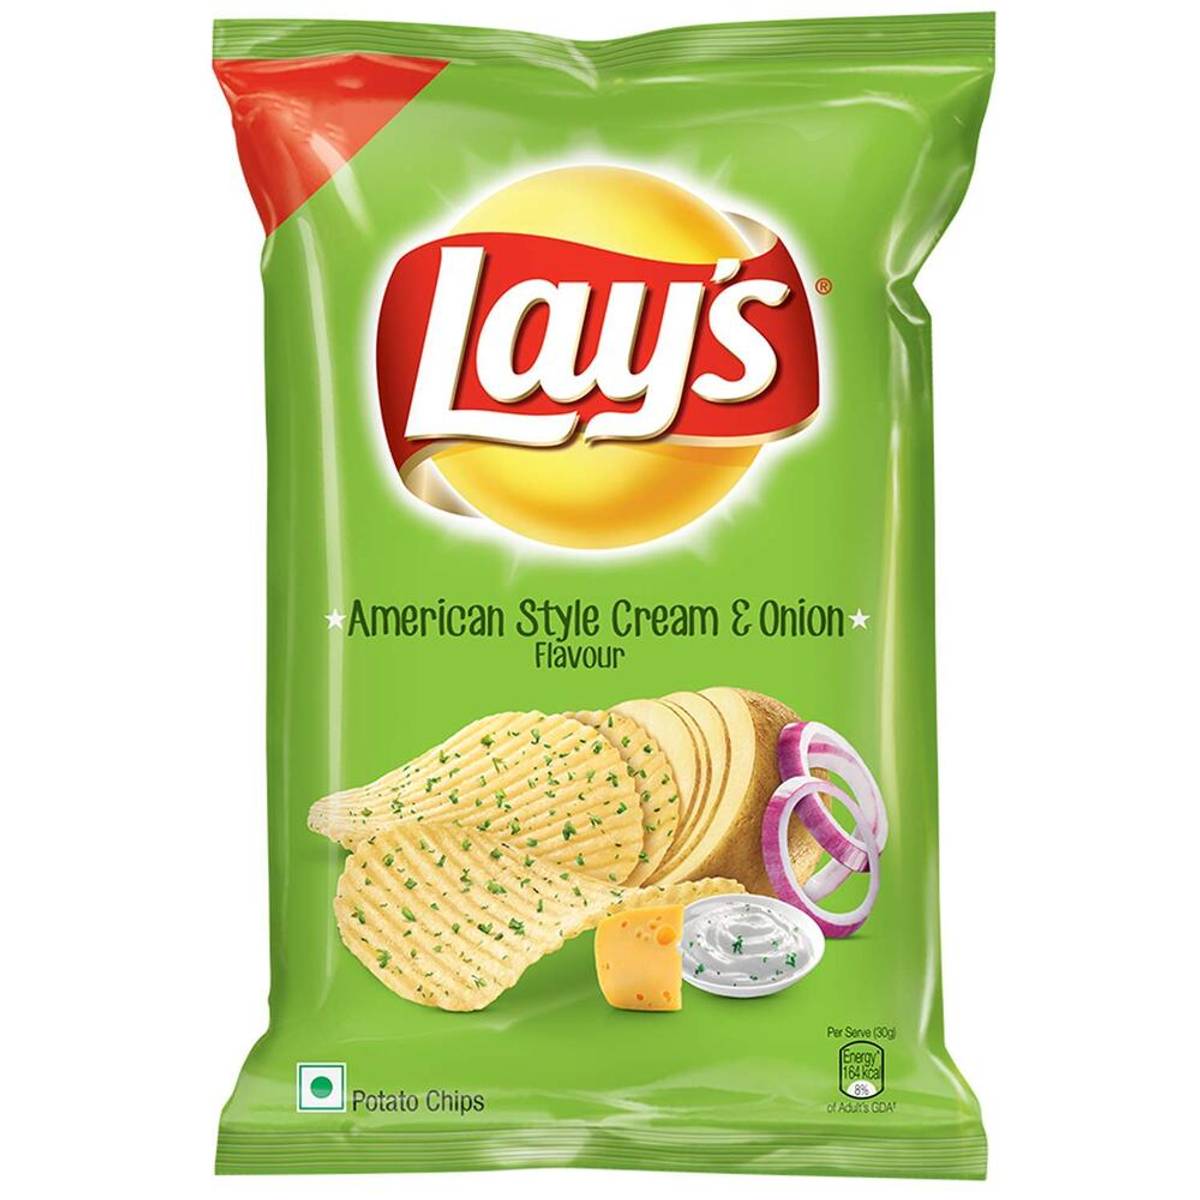 Lays Chips - American Style Cream & Onion, 12 G